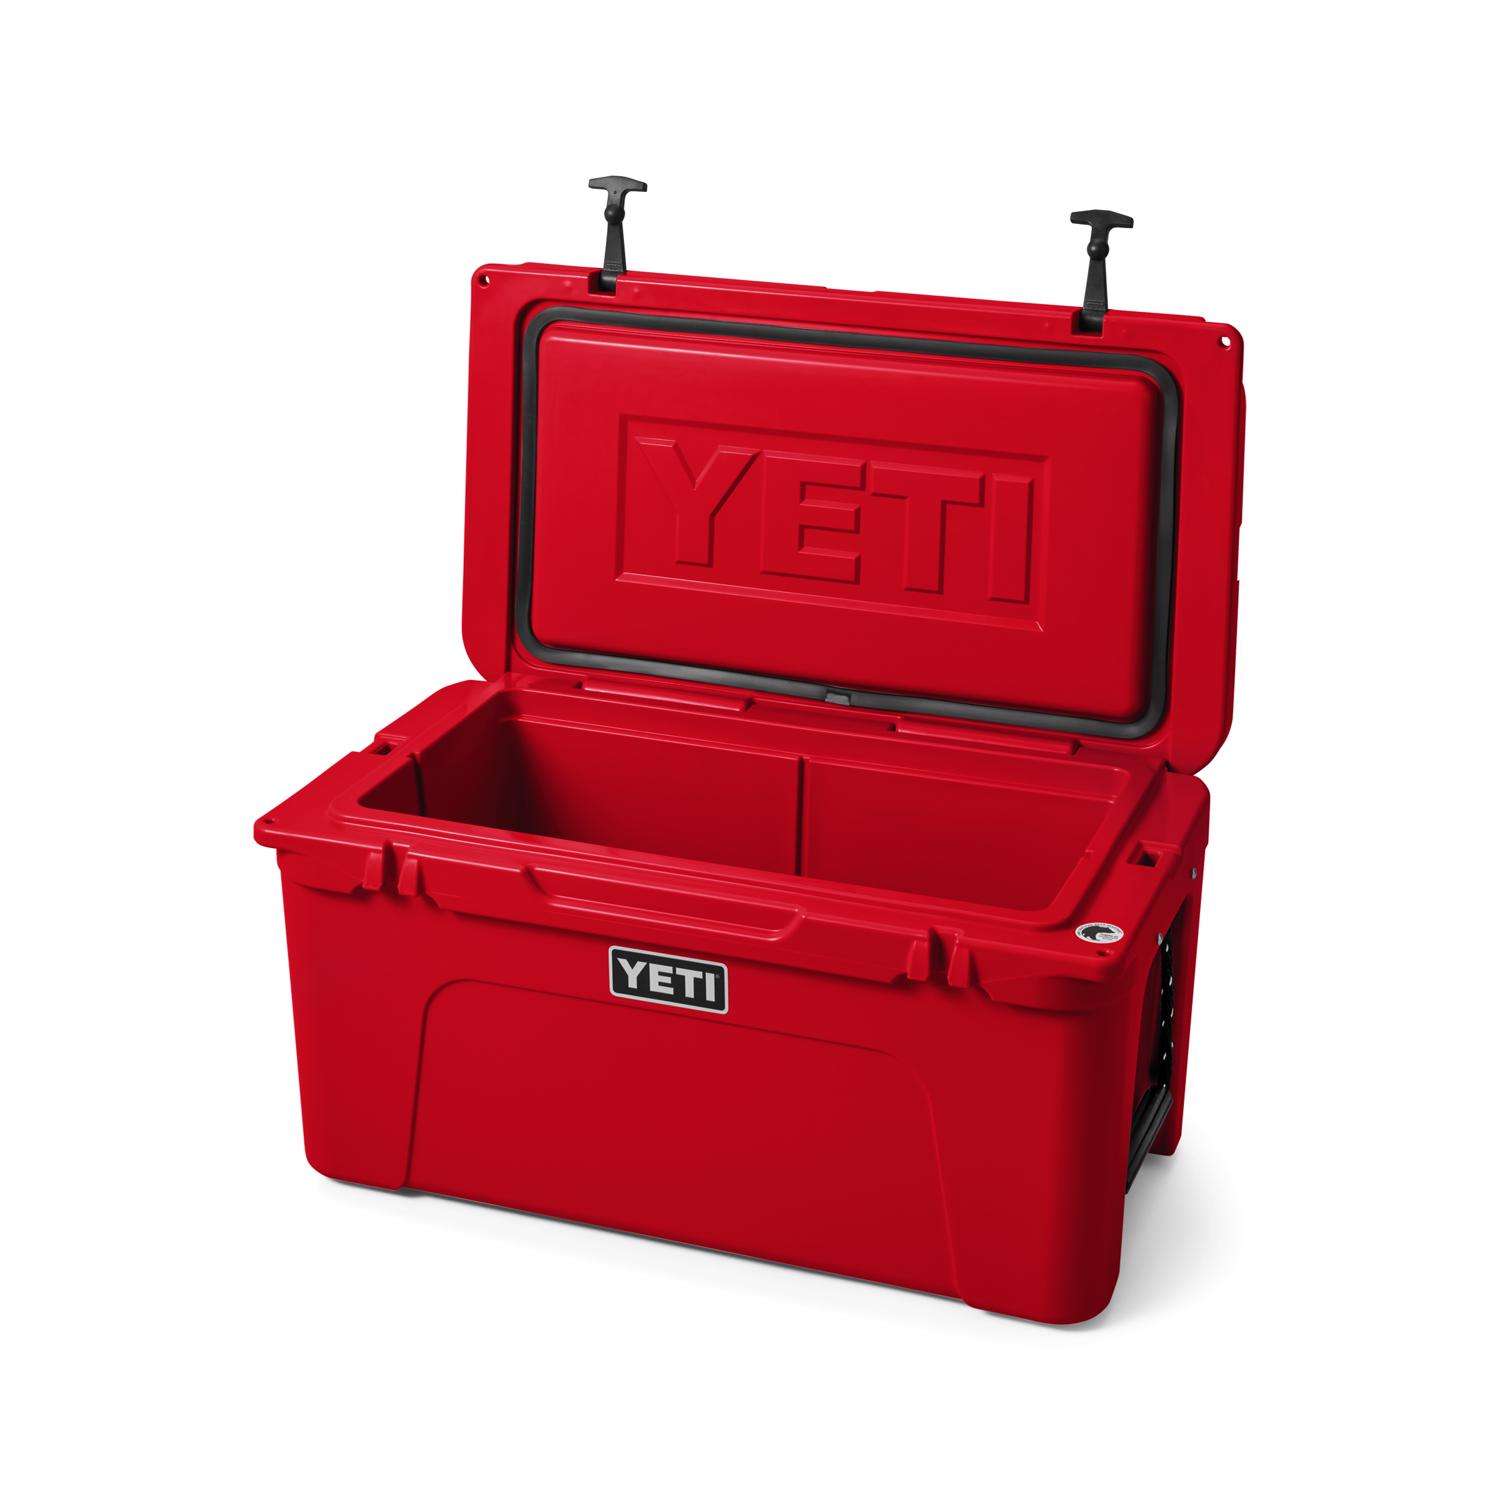 YETI Tundra 65 Cooler Camp Green Cooler NEW Display Unit In Box No